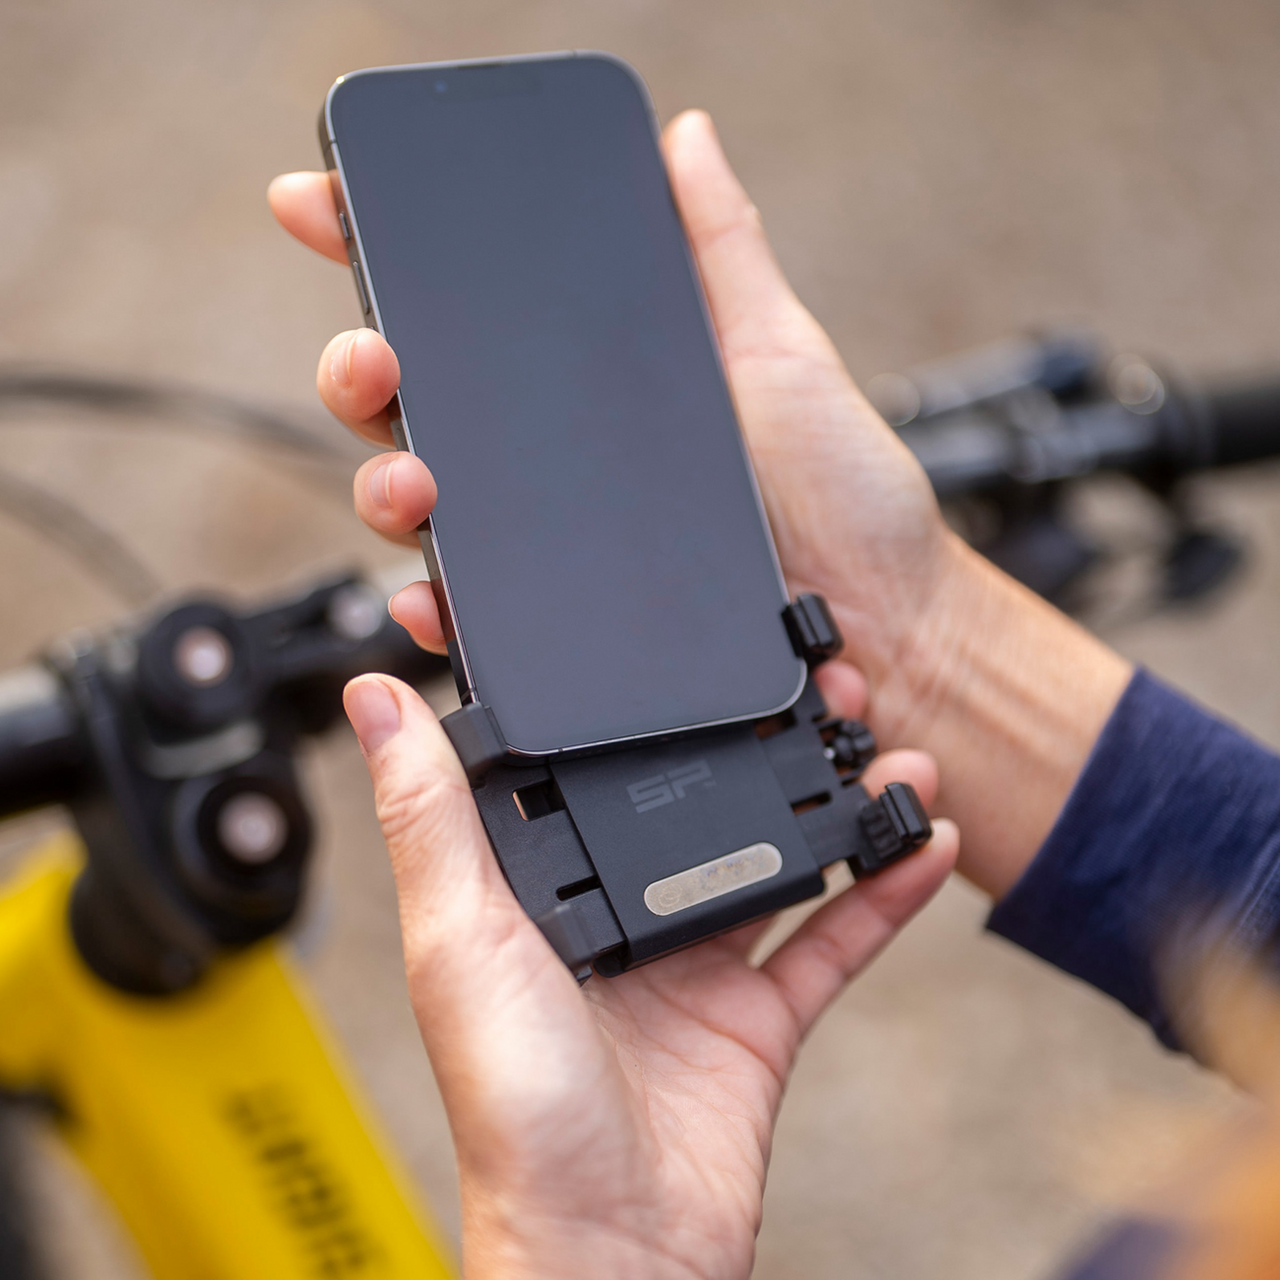 Moto Mount Phone Pro BK - The Ultimate Smartphone Mount for Motorbikes, CSC Motorcycles